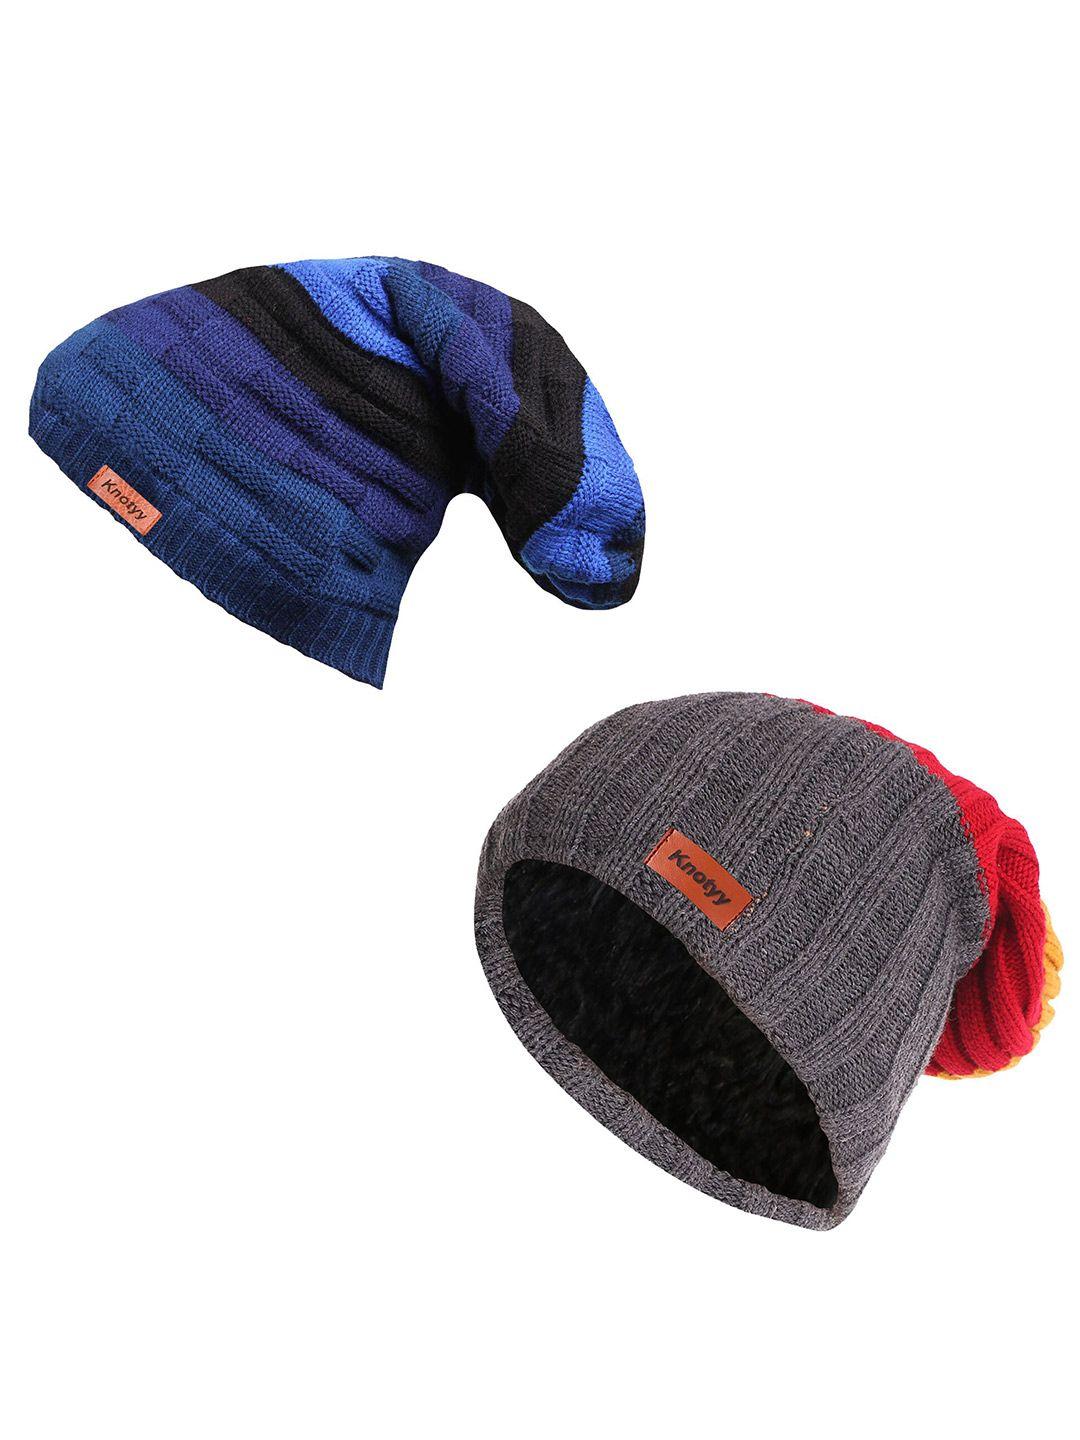 knotyy unisex pack of 2 blue & grey beanie